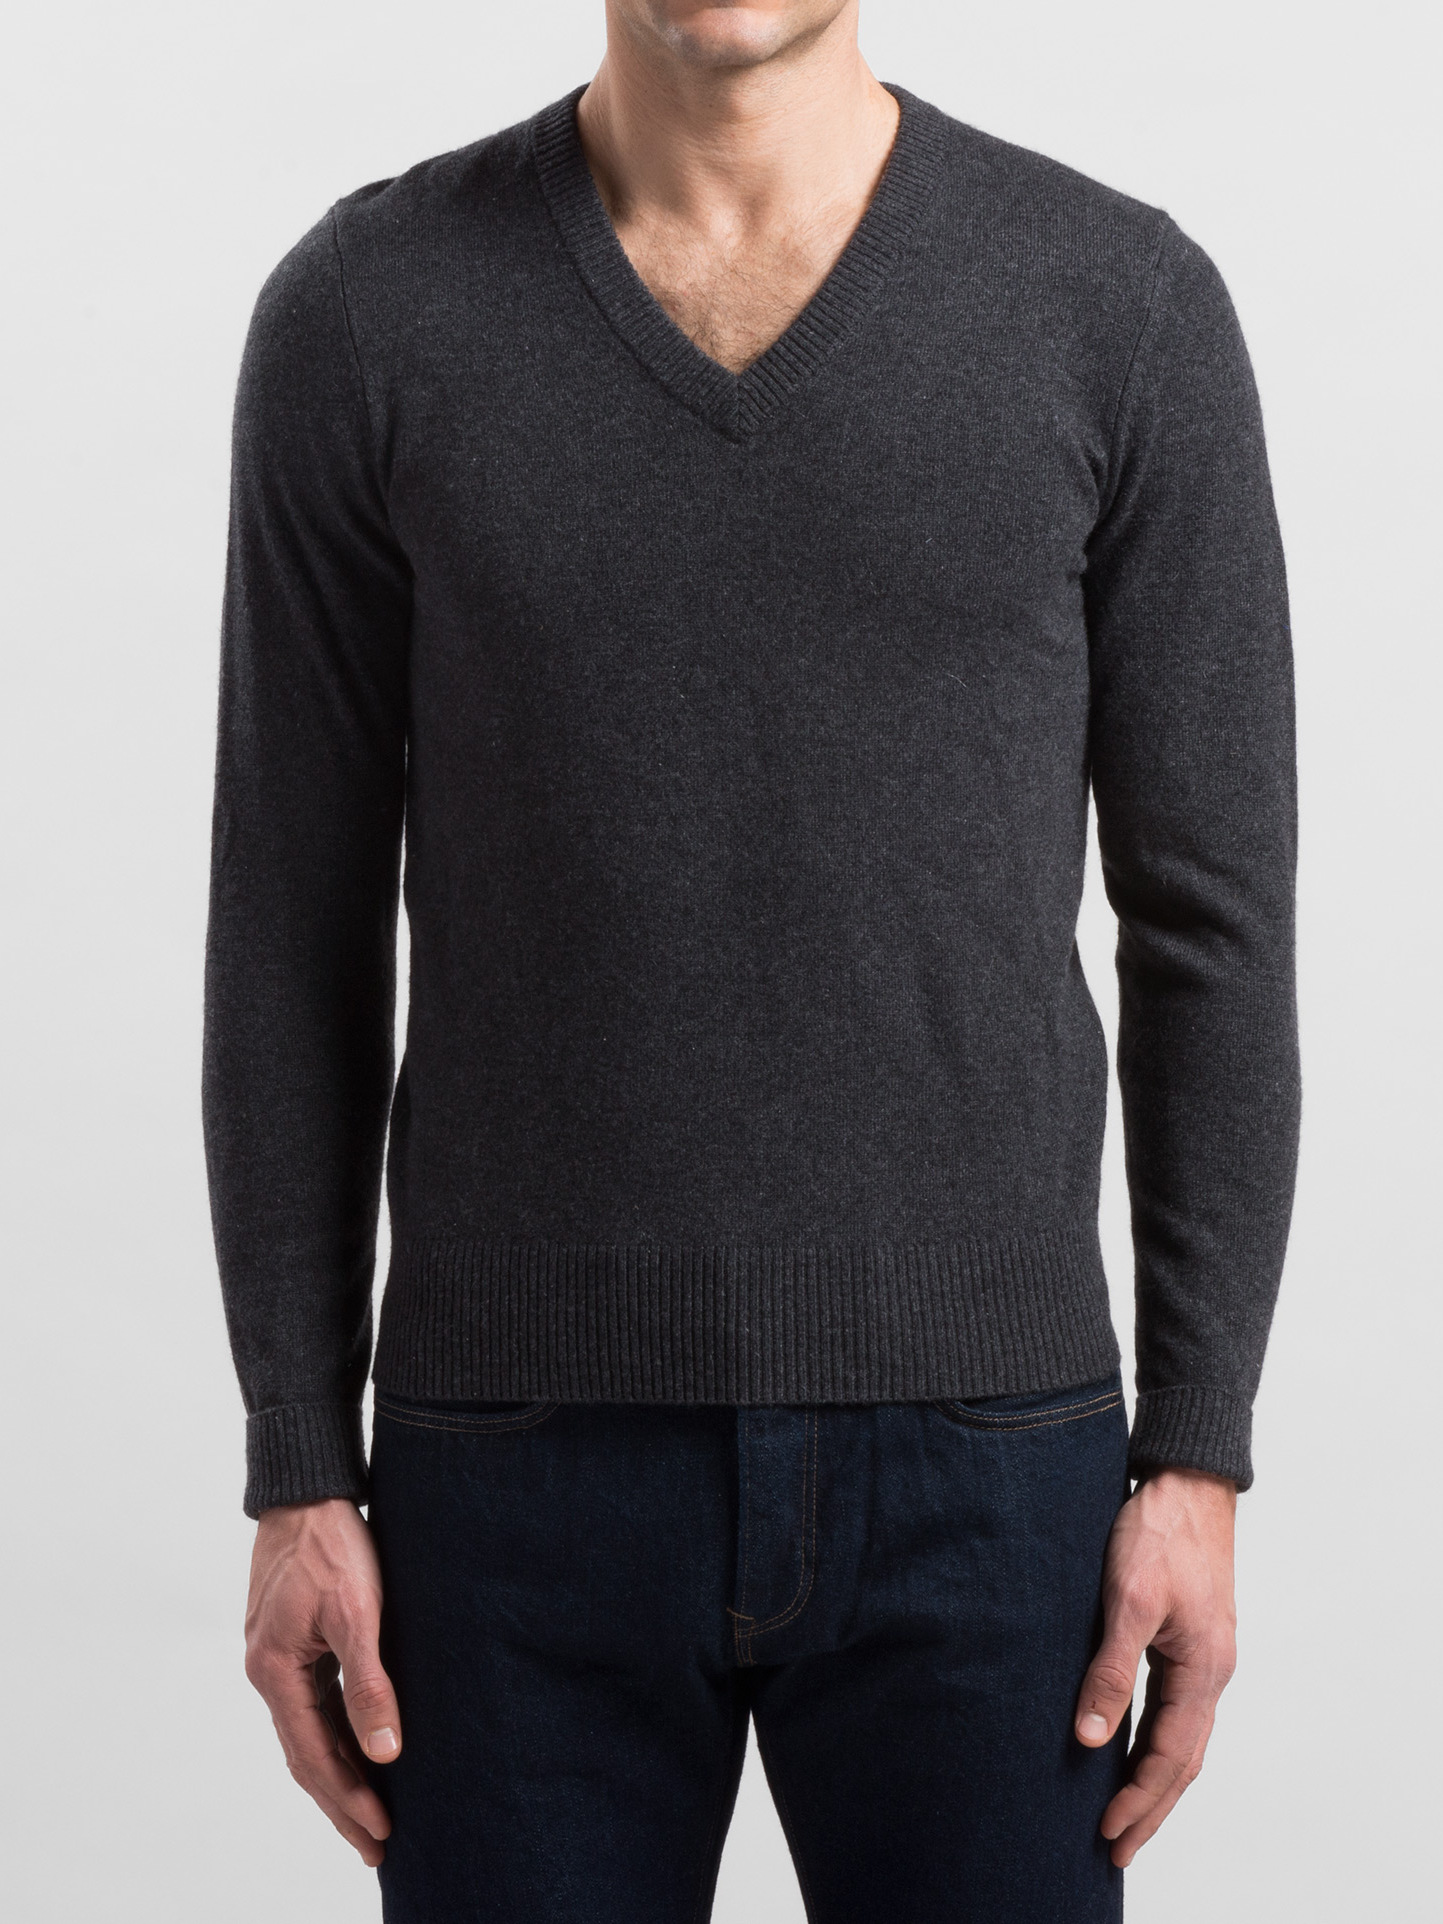 Charcoal Cashmere V-Neck Sweater by Proper Cloth